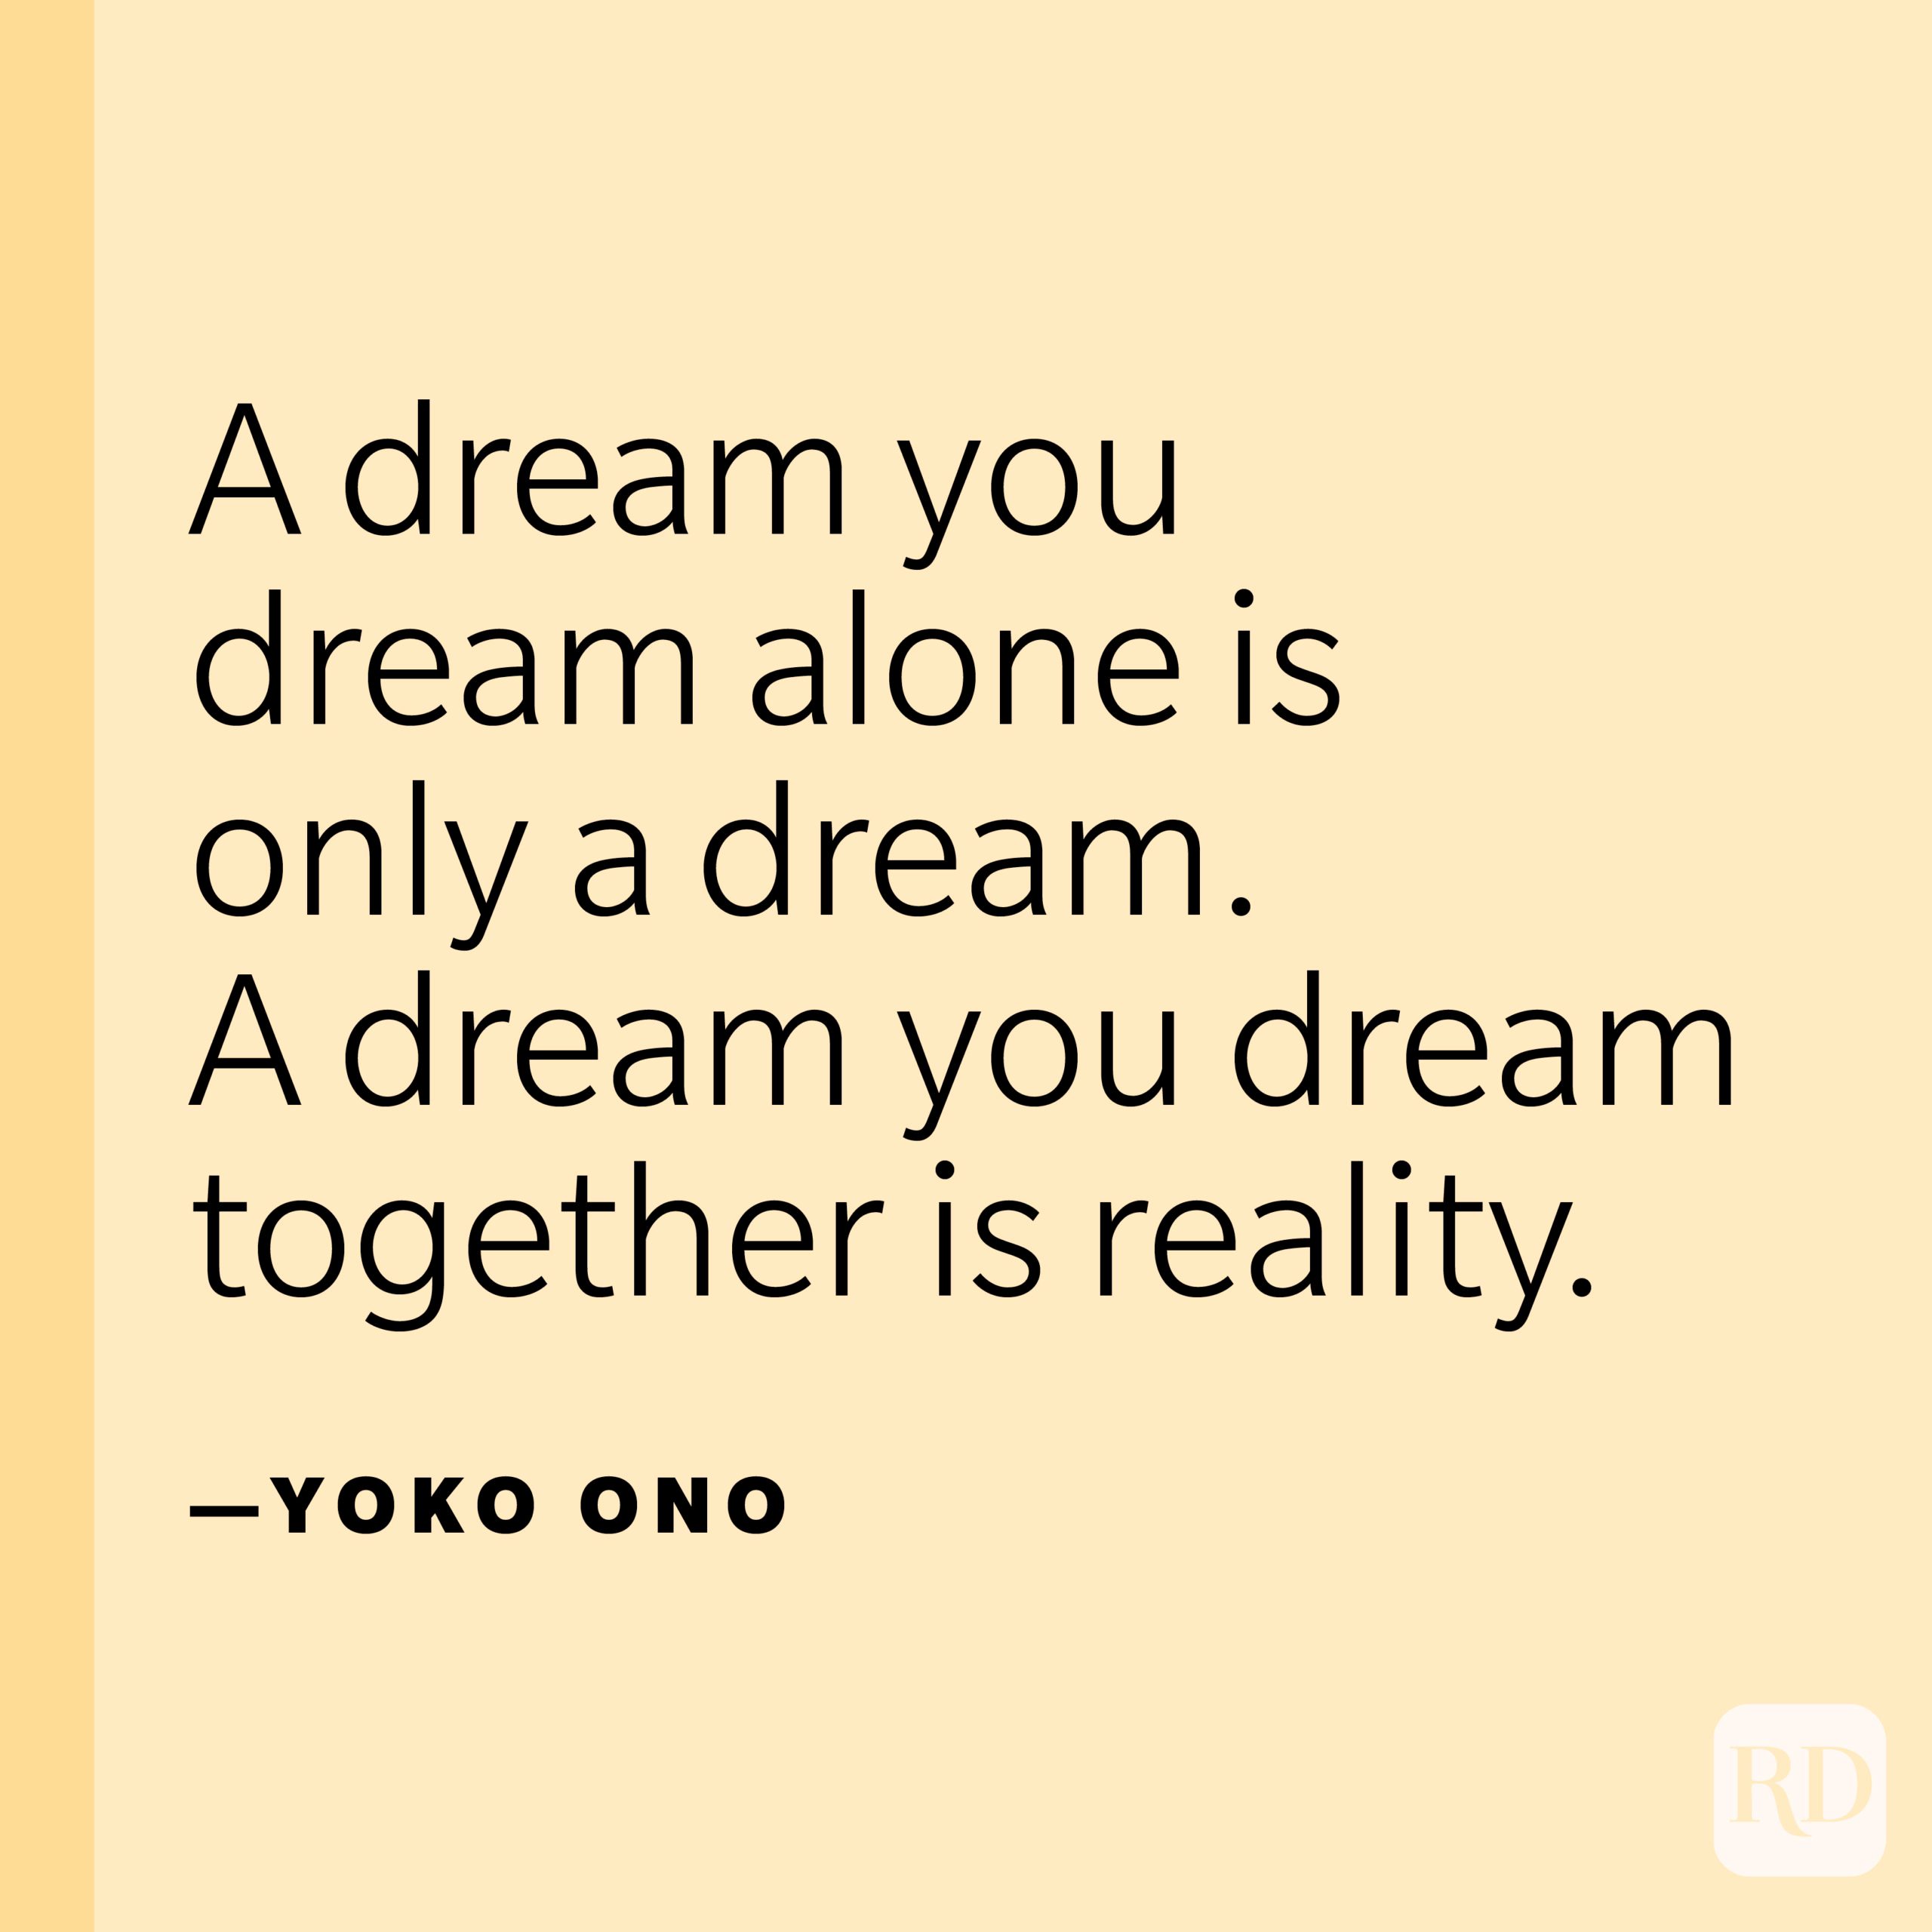 30 "Dream Big" Quotes That Will Motivate You Now | Reader's Digest